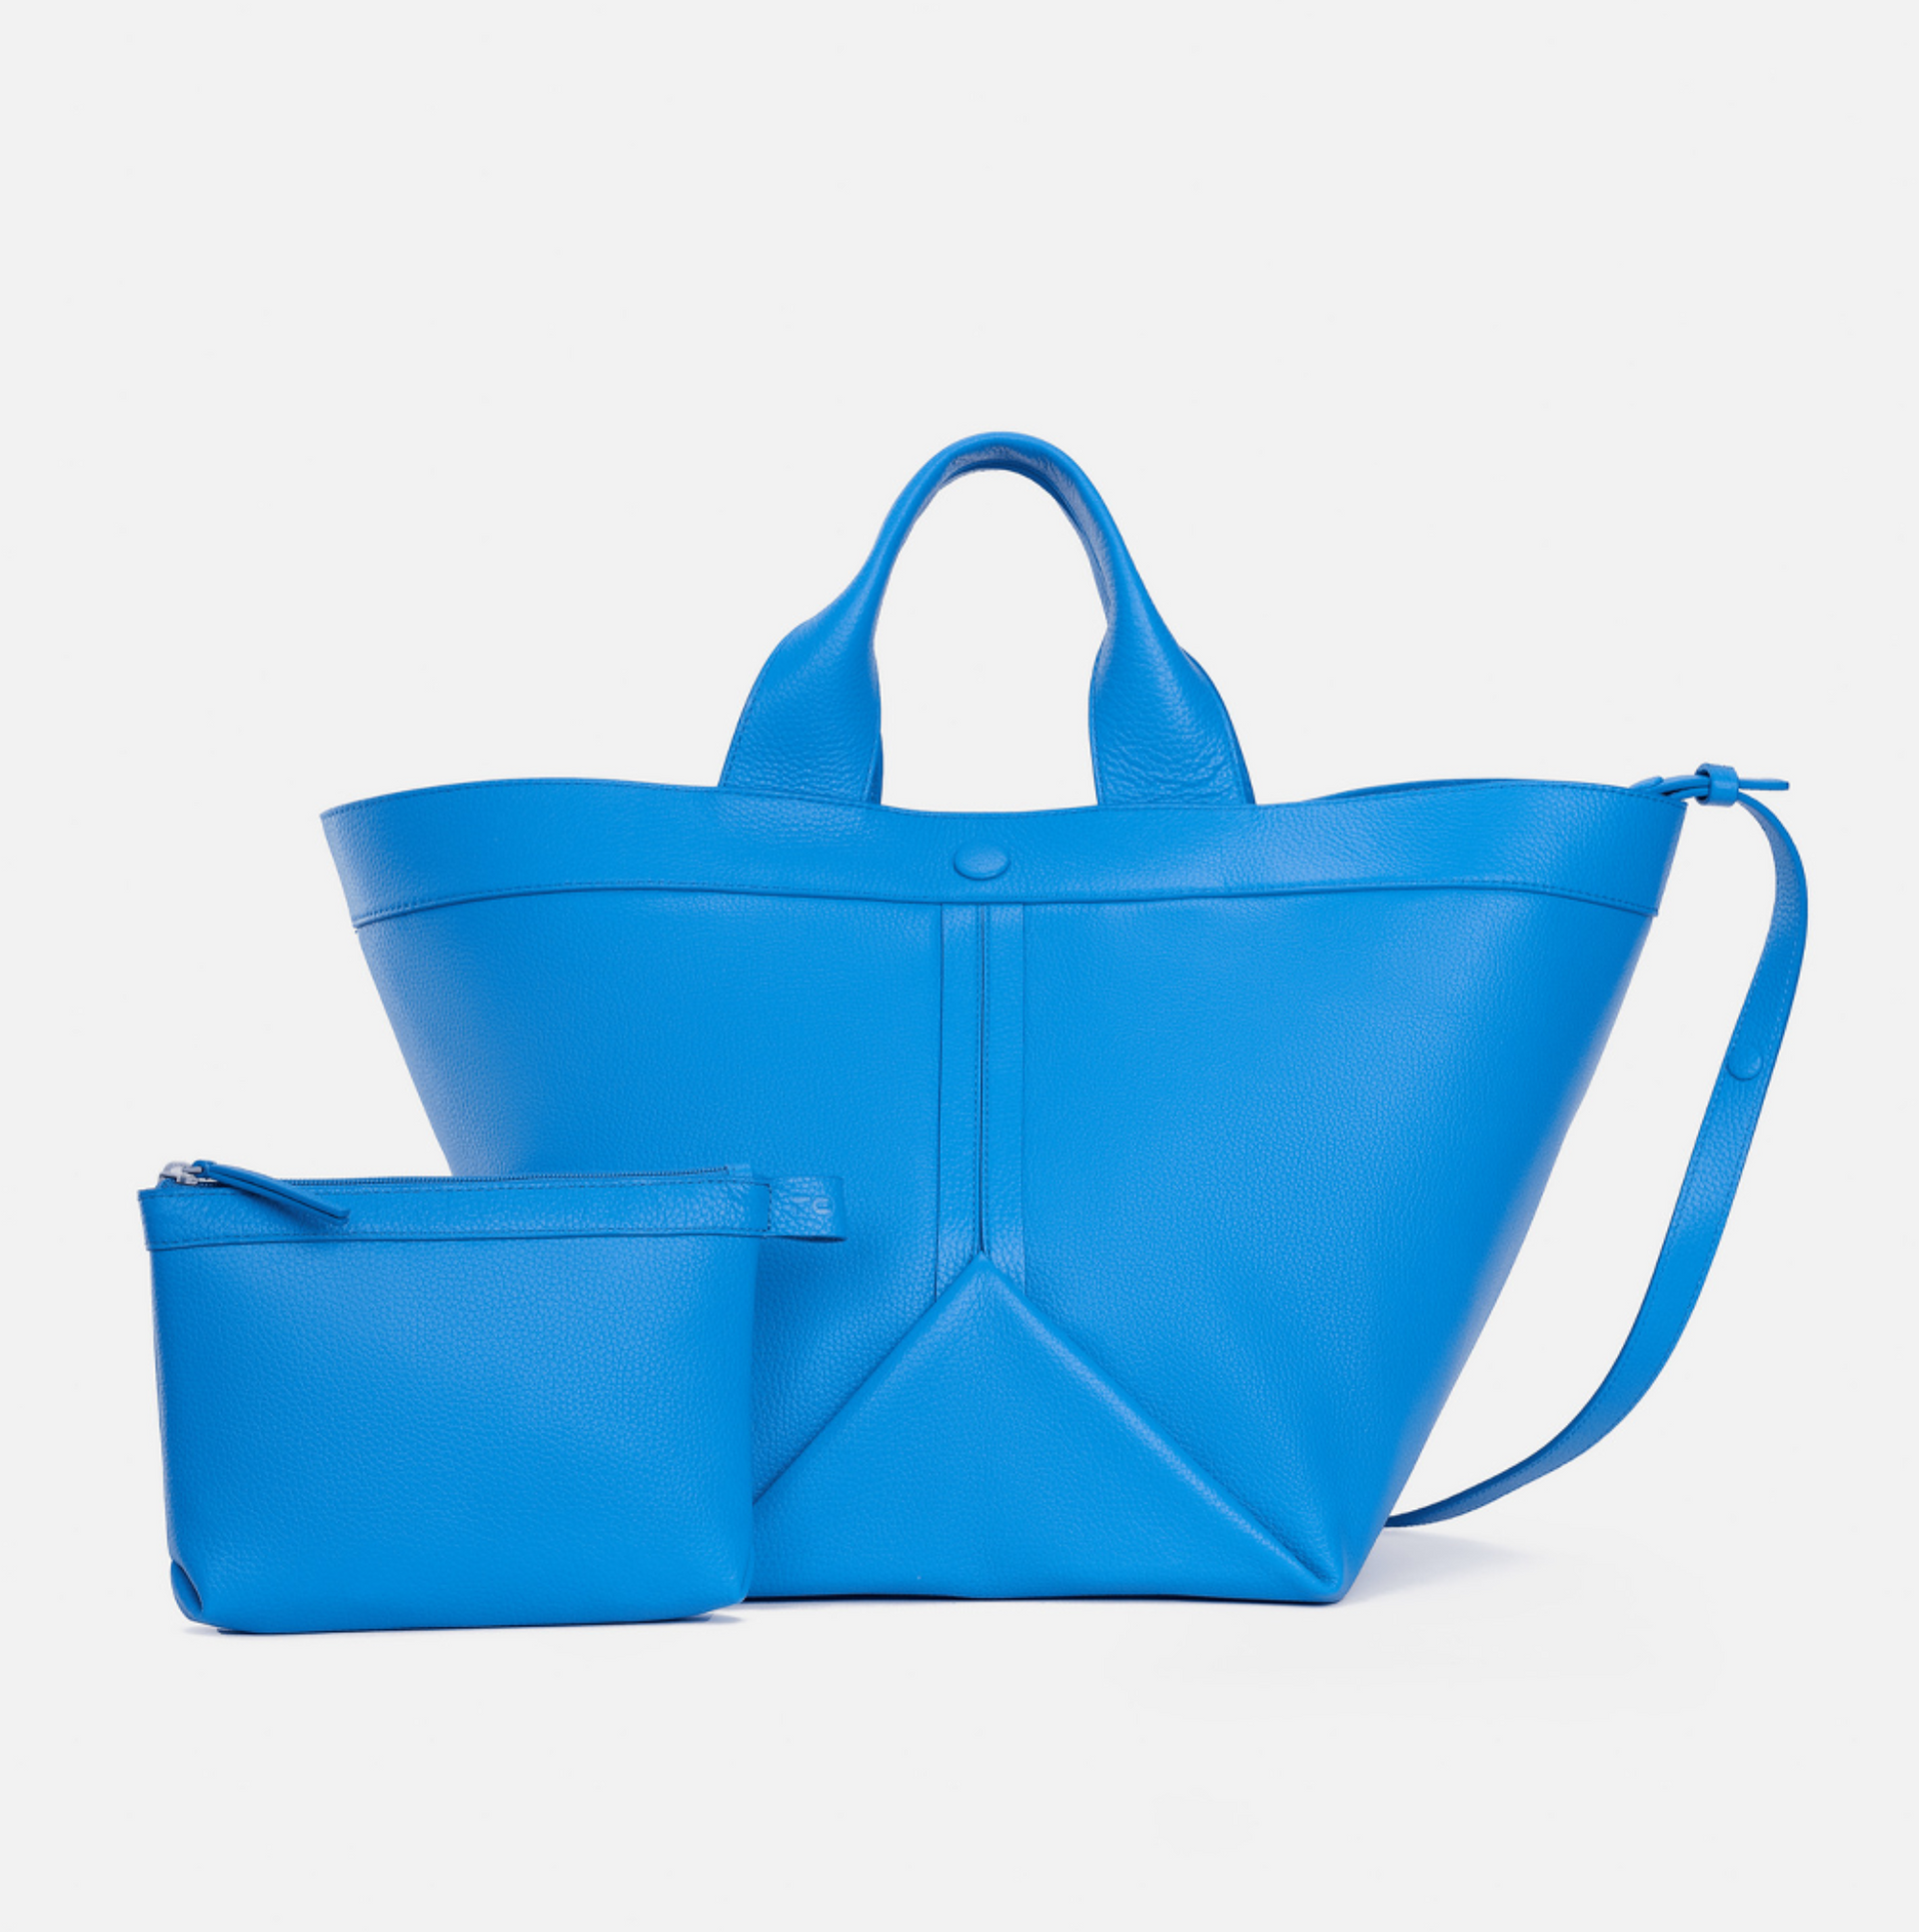 Gusset large pebble leather tote in azure